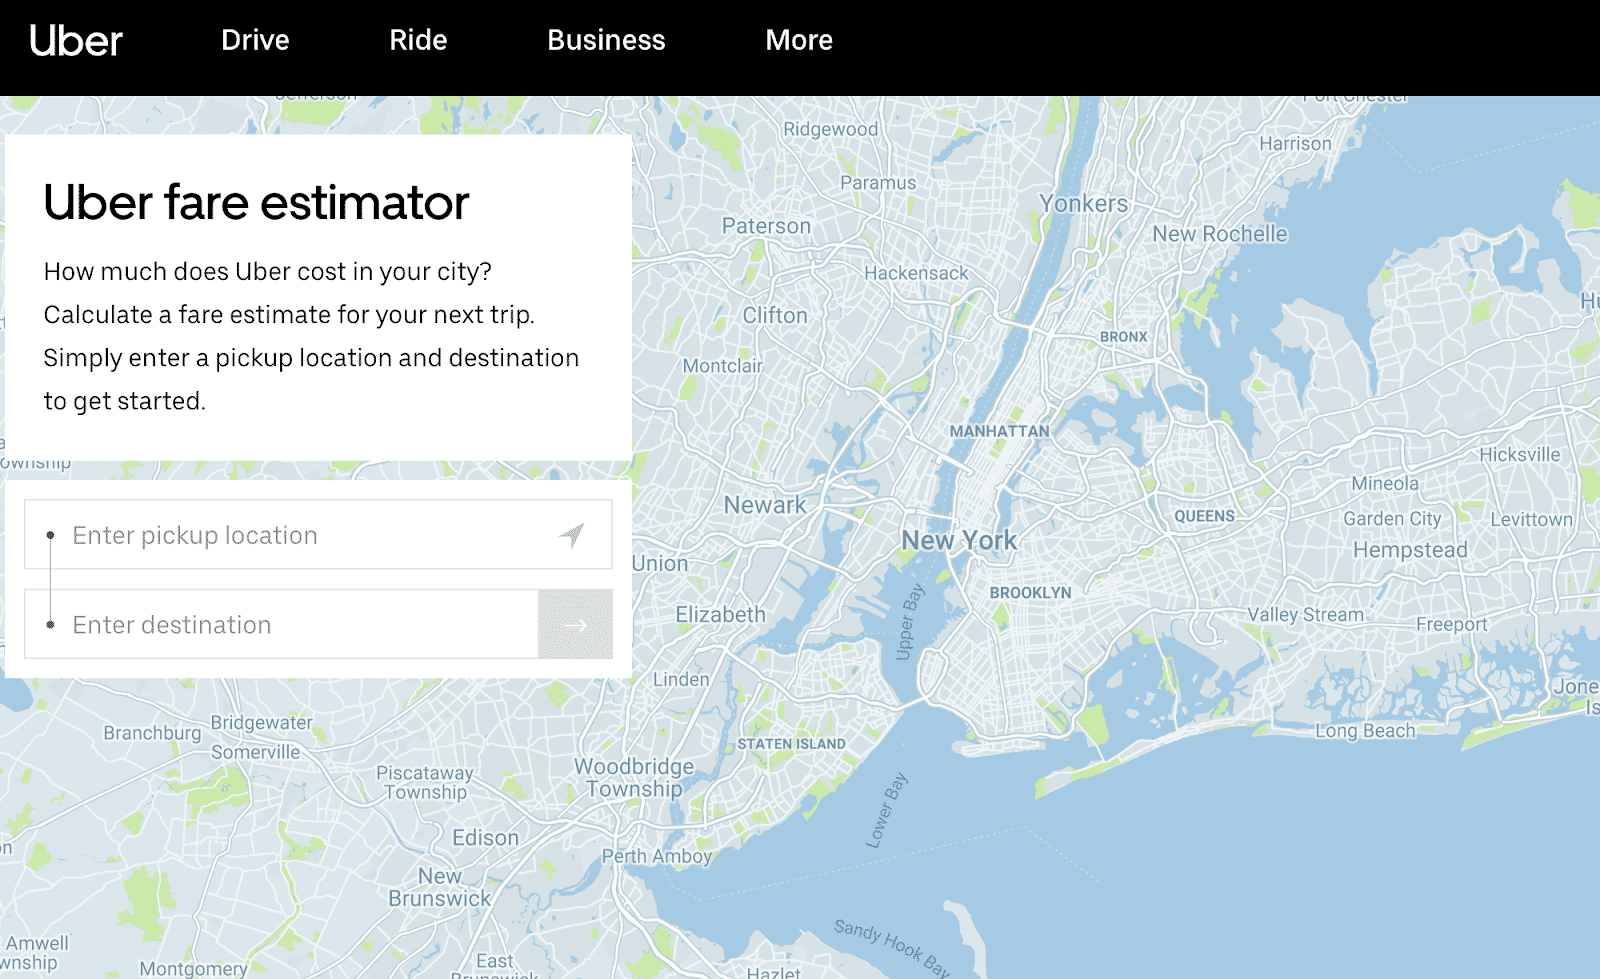 image showing an Uber pricing screenshot - for how much is Uber post on gigworker.com